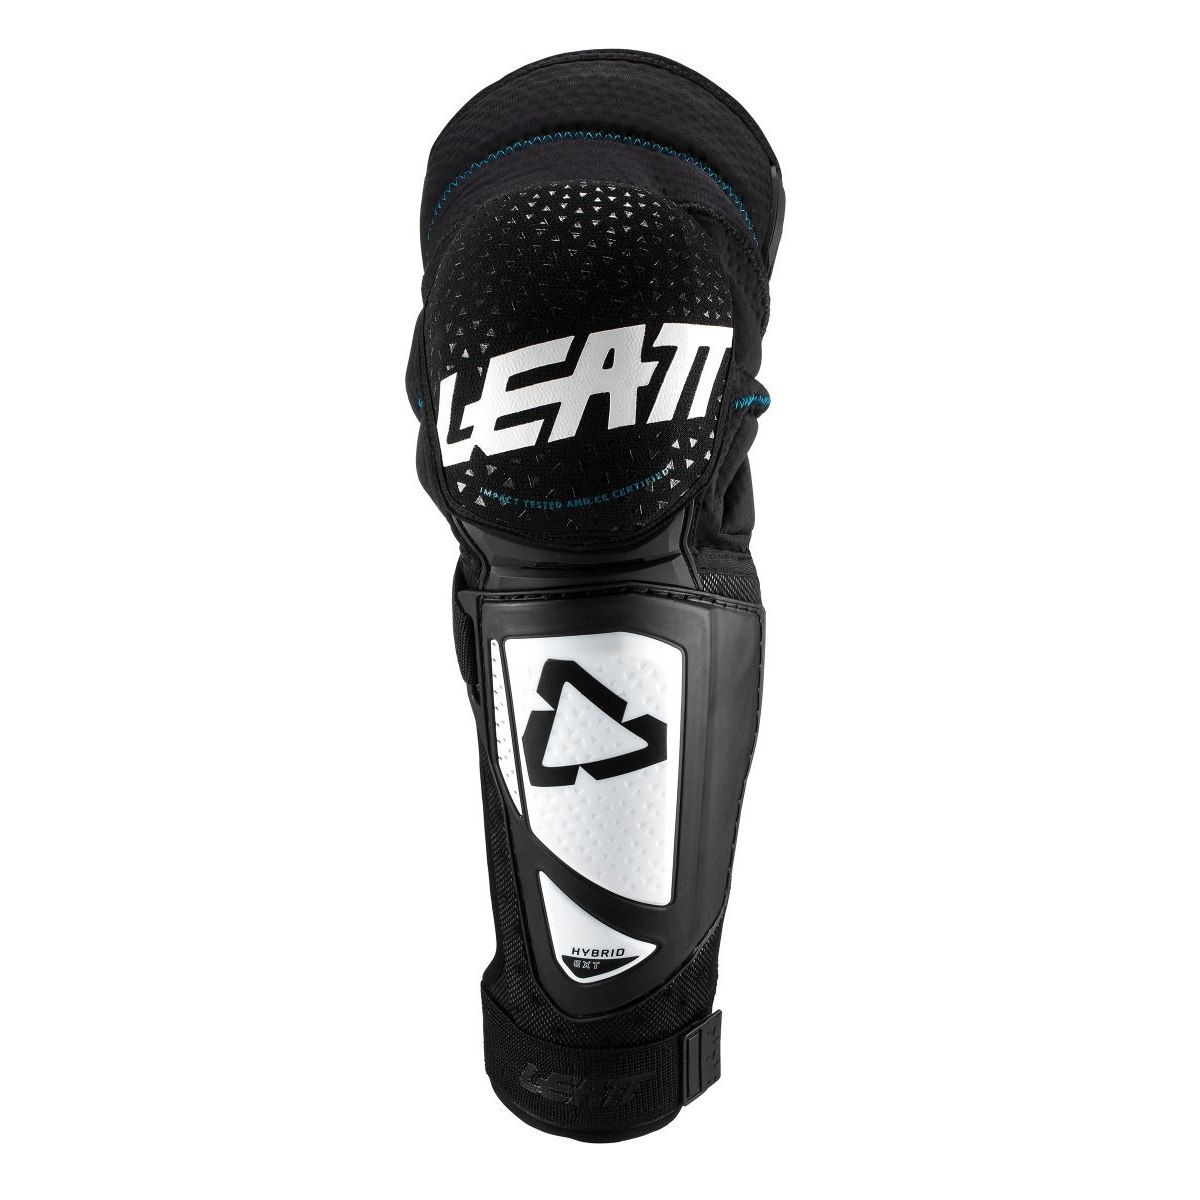 Picture of Leatt Knee and Shin Guard 3DF Hybrid EXT - white/black